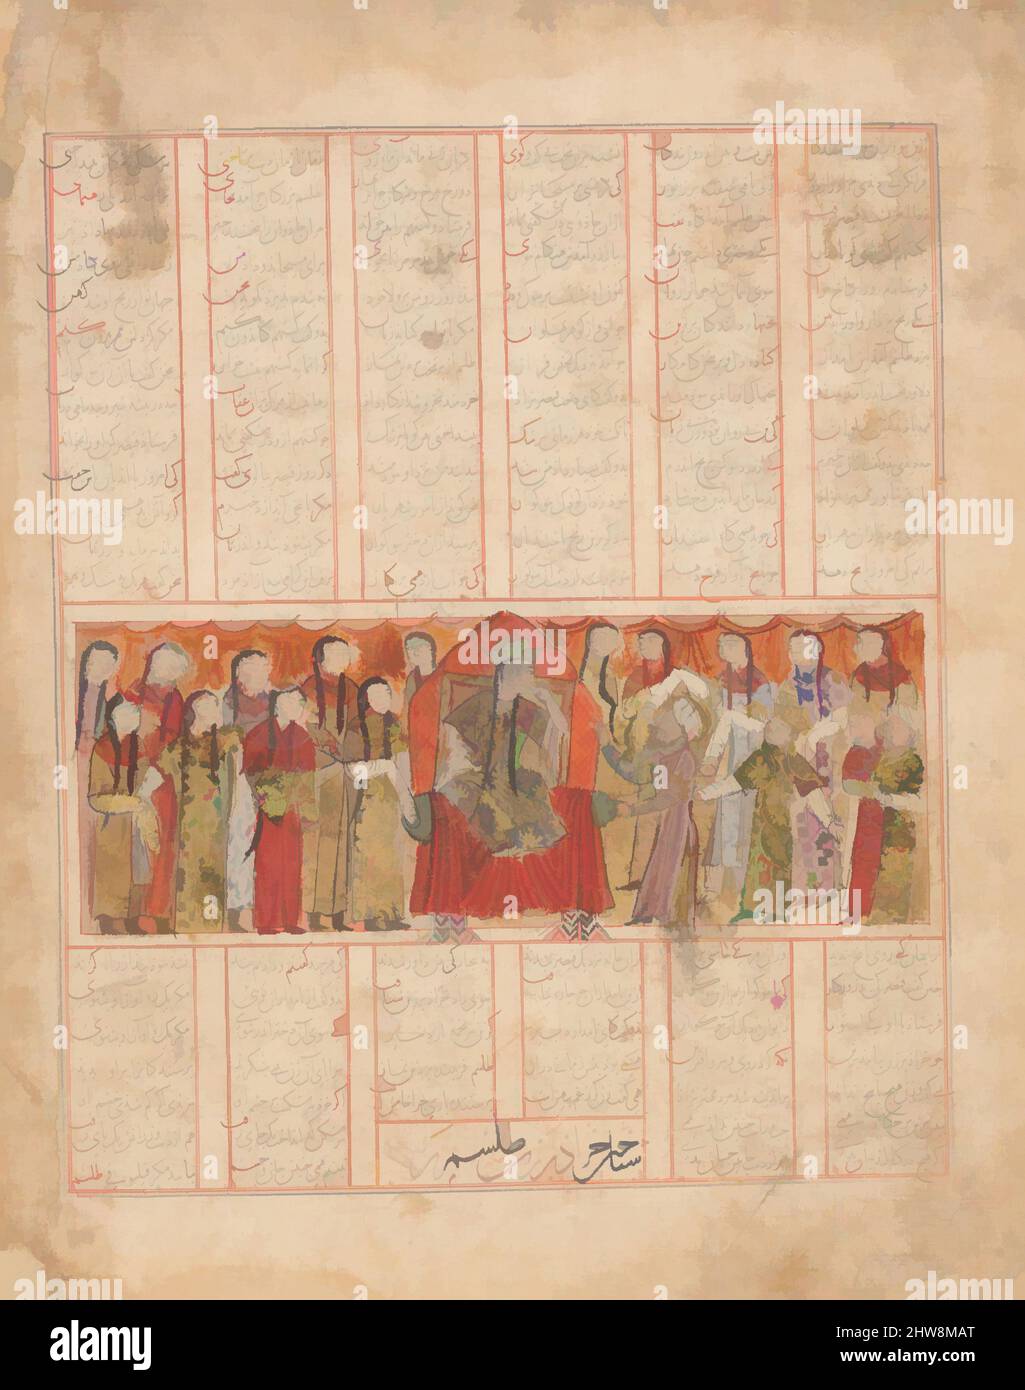 Art inspired by Kharrad Recognizes the 'Princess' as being an Automaton', Folio from a Shahnama (Book of Kings), A.H. 741/A.D. 1341, Made in Iran, Shiraz, Ink, watercolor, and gold on paper, Image 9 1/2 in x 11 3/8 in., Codices, Classic works modernized by Artotop with a splash of modernity. Shapes, color and value, eye-catching visual impact on art. Emotions through freedom of artworks in a contemporary way. A timeless message pursuing a wildly creative new direction. Artists turning to the digital medium and creating the Artotop NFT Stock Photo